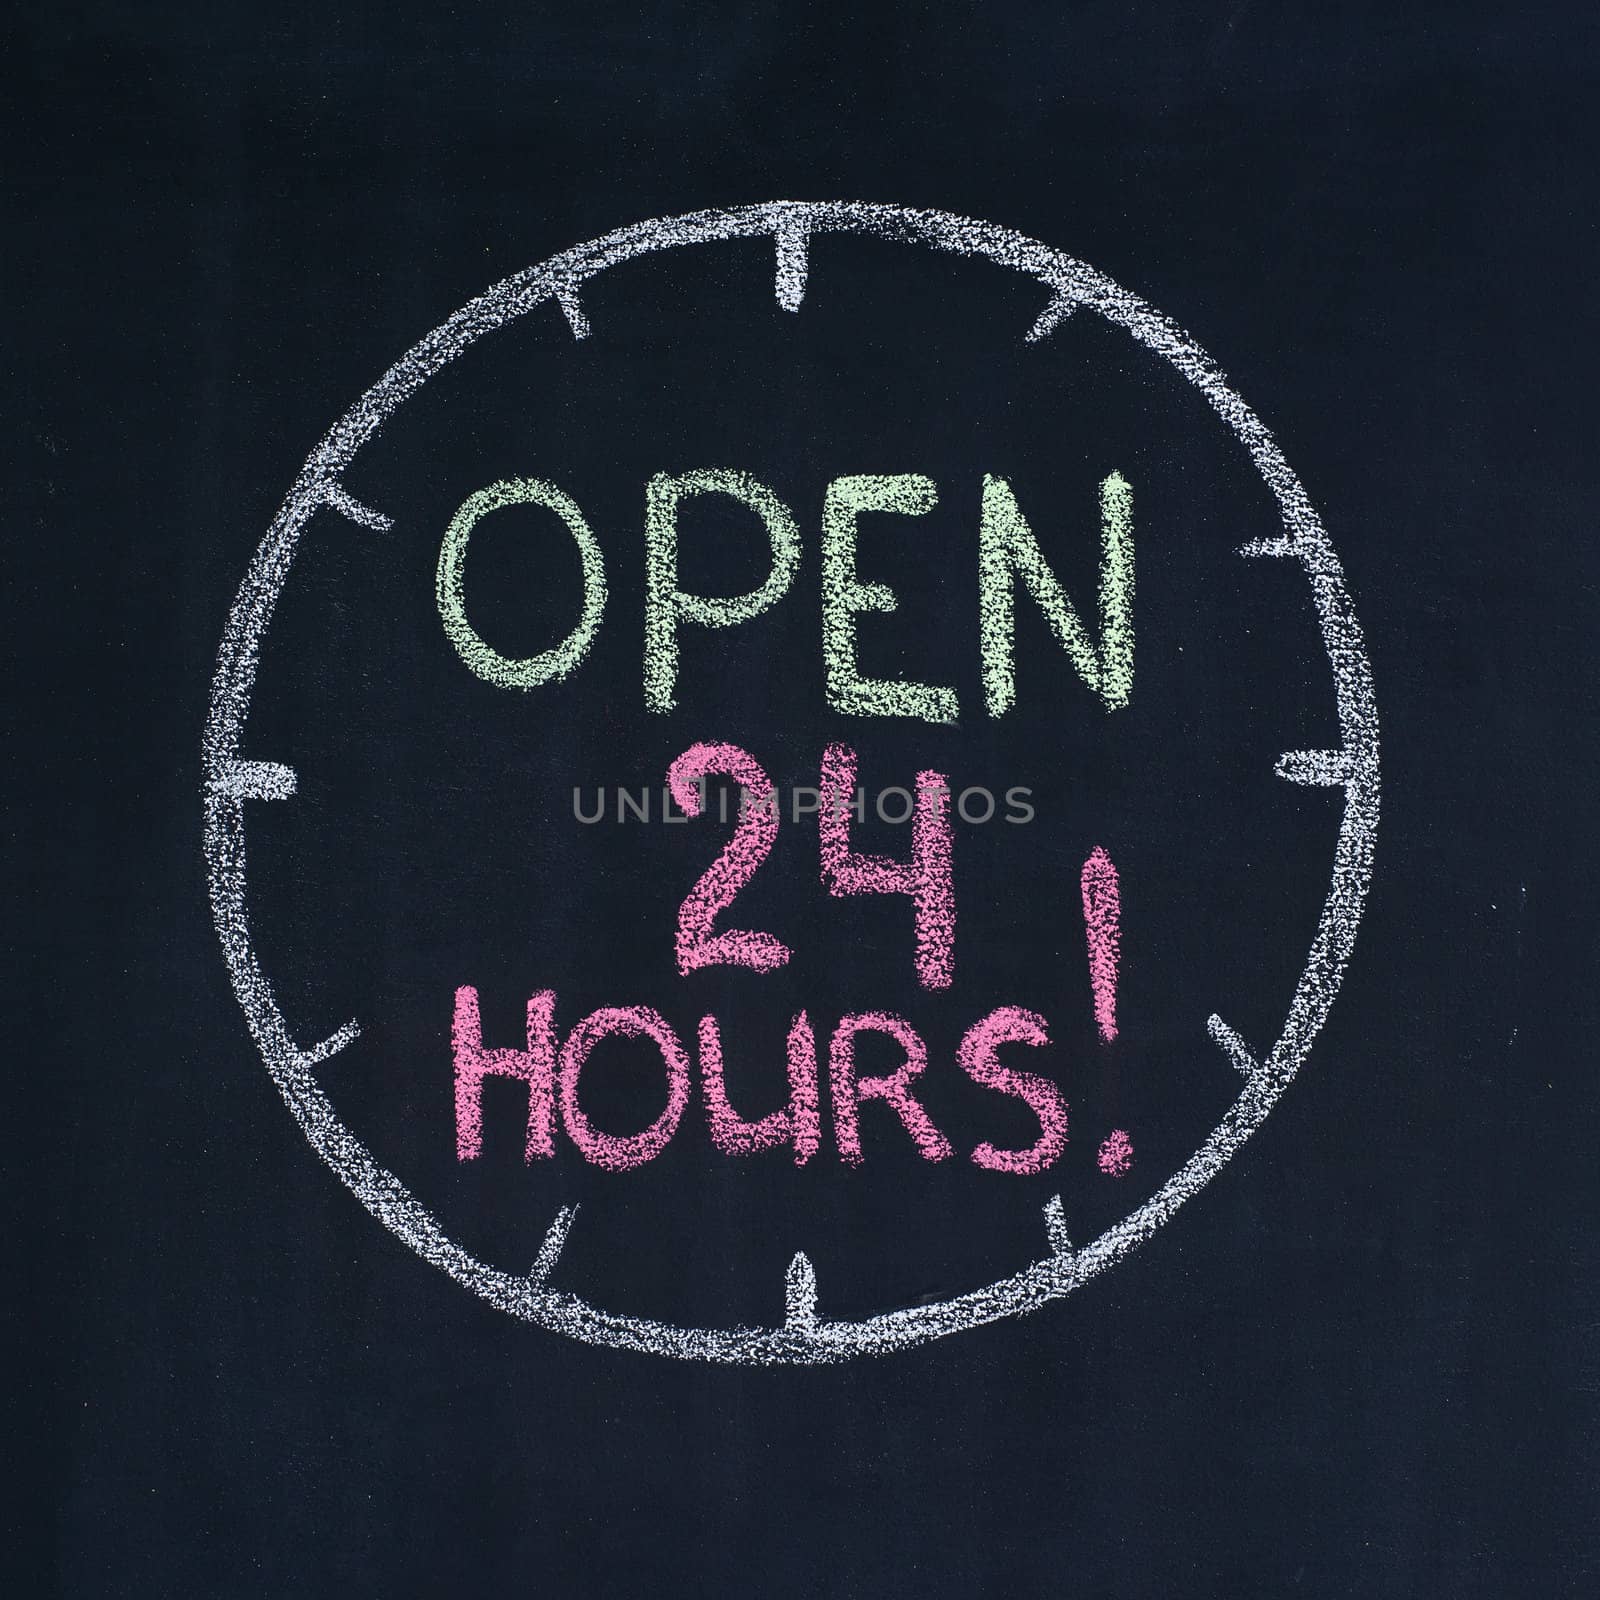 The dial with text "Open 24 hours!", drawn on a blackboard